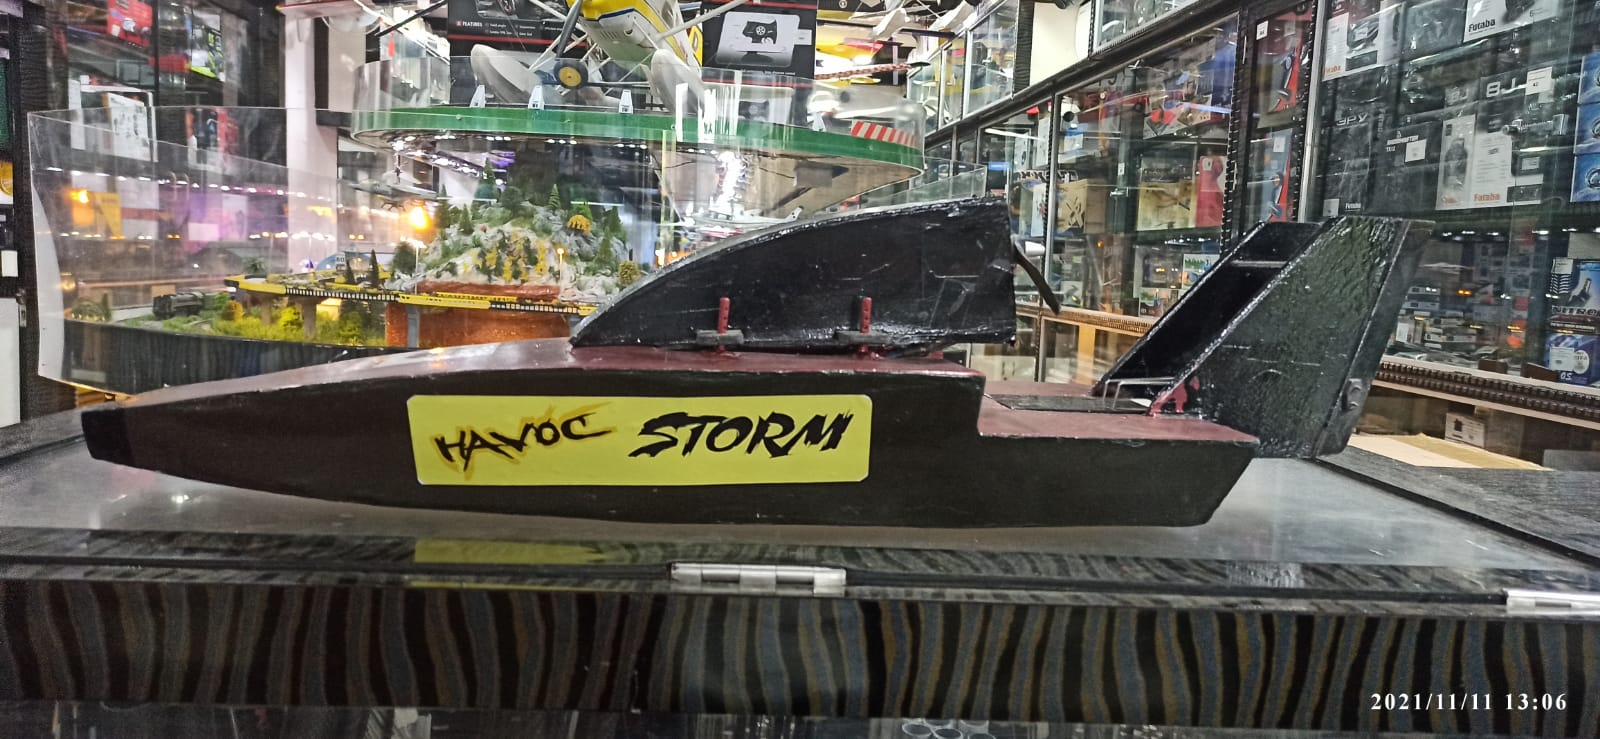 HAVOC STORM RC BOAT BE08 RED AND GREEN (QUALITY PRE OWNED)